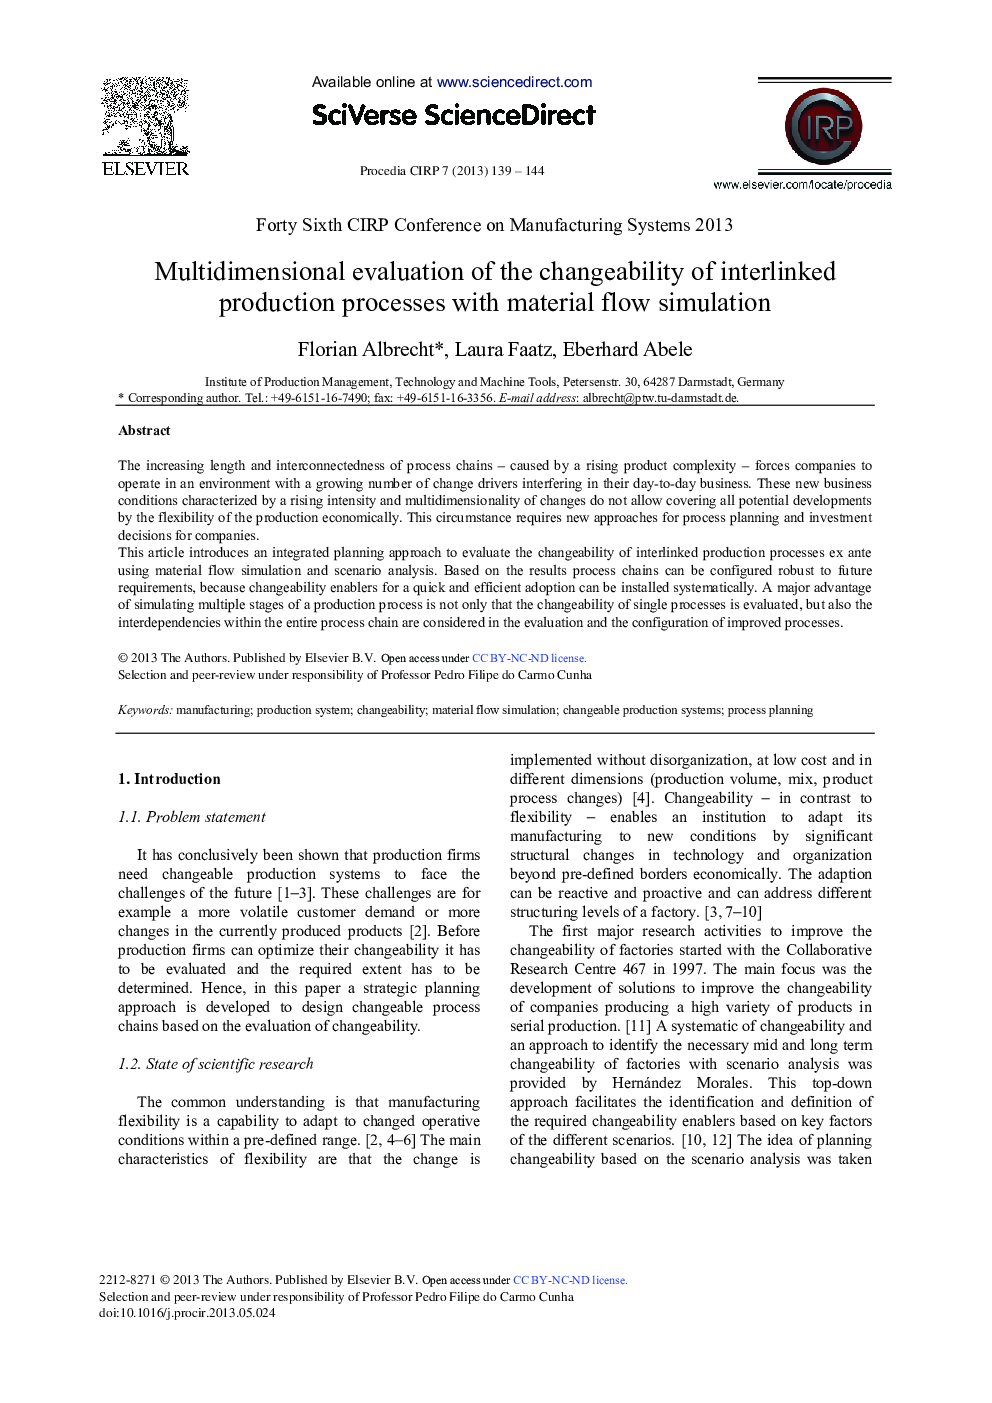 Multidimensional Evaluation of the Changeability of Interlinked Production Processes with Material Flow Simulation